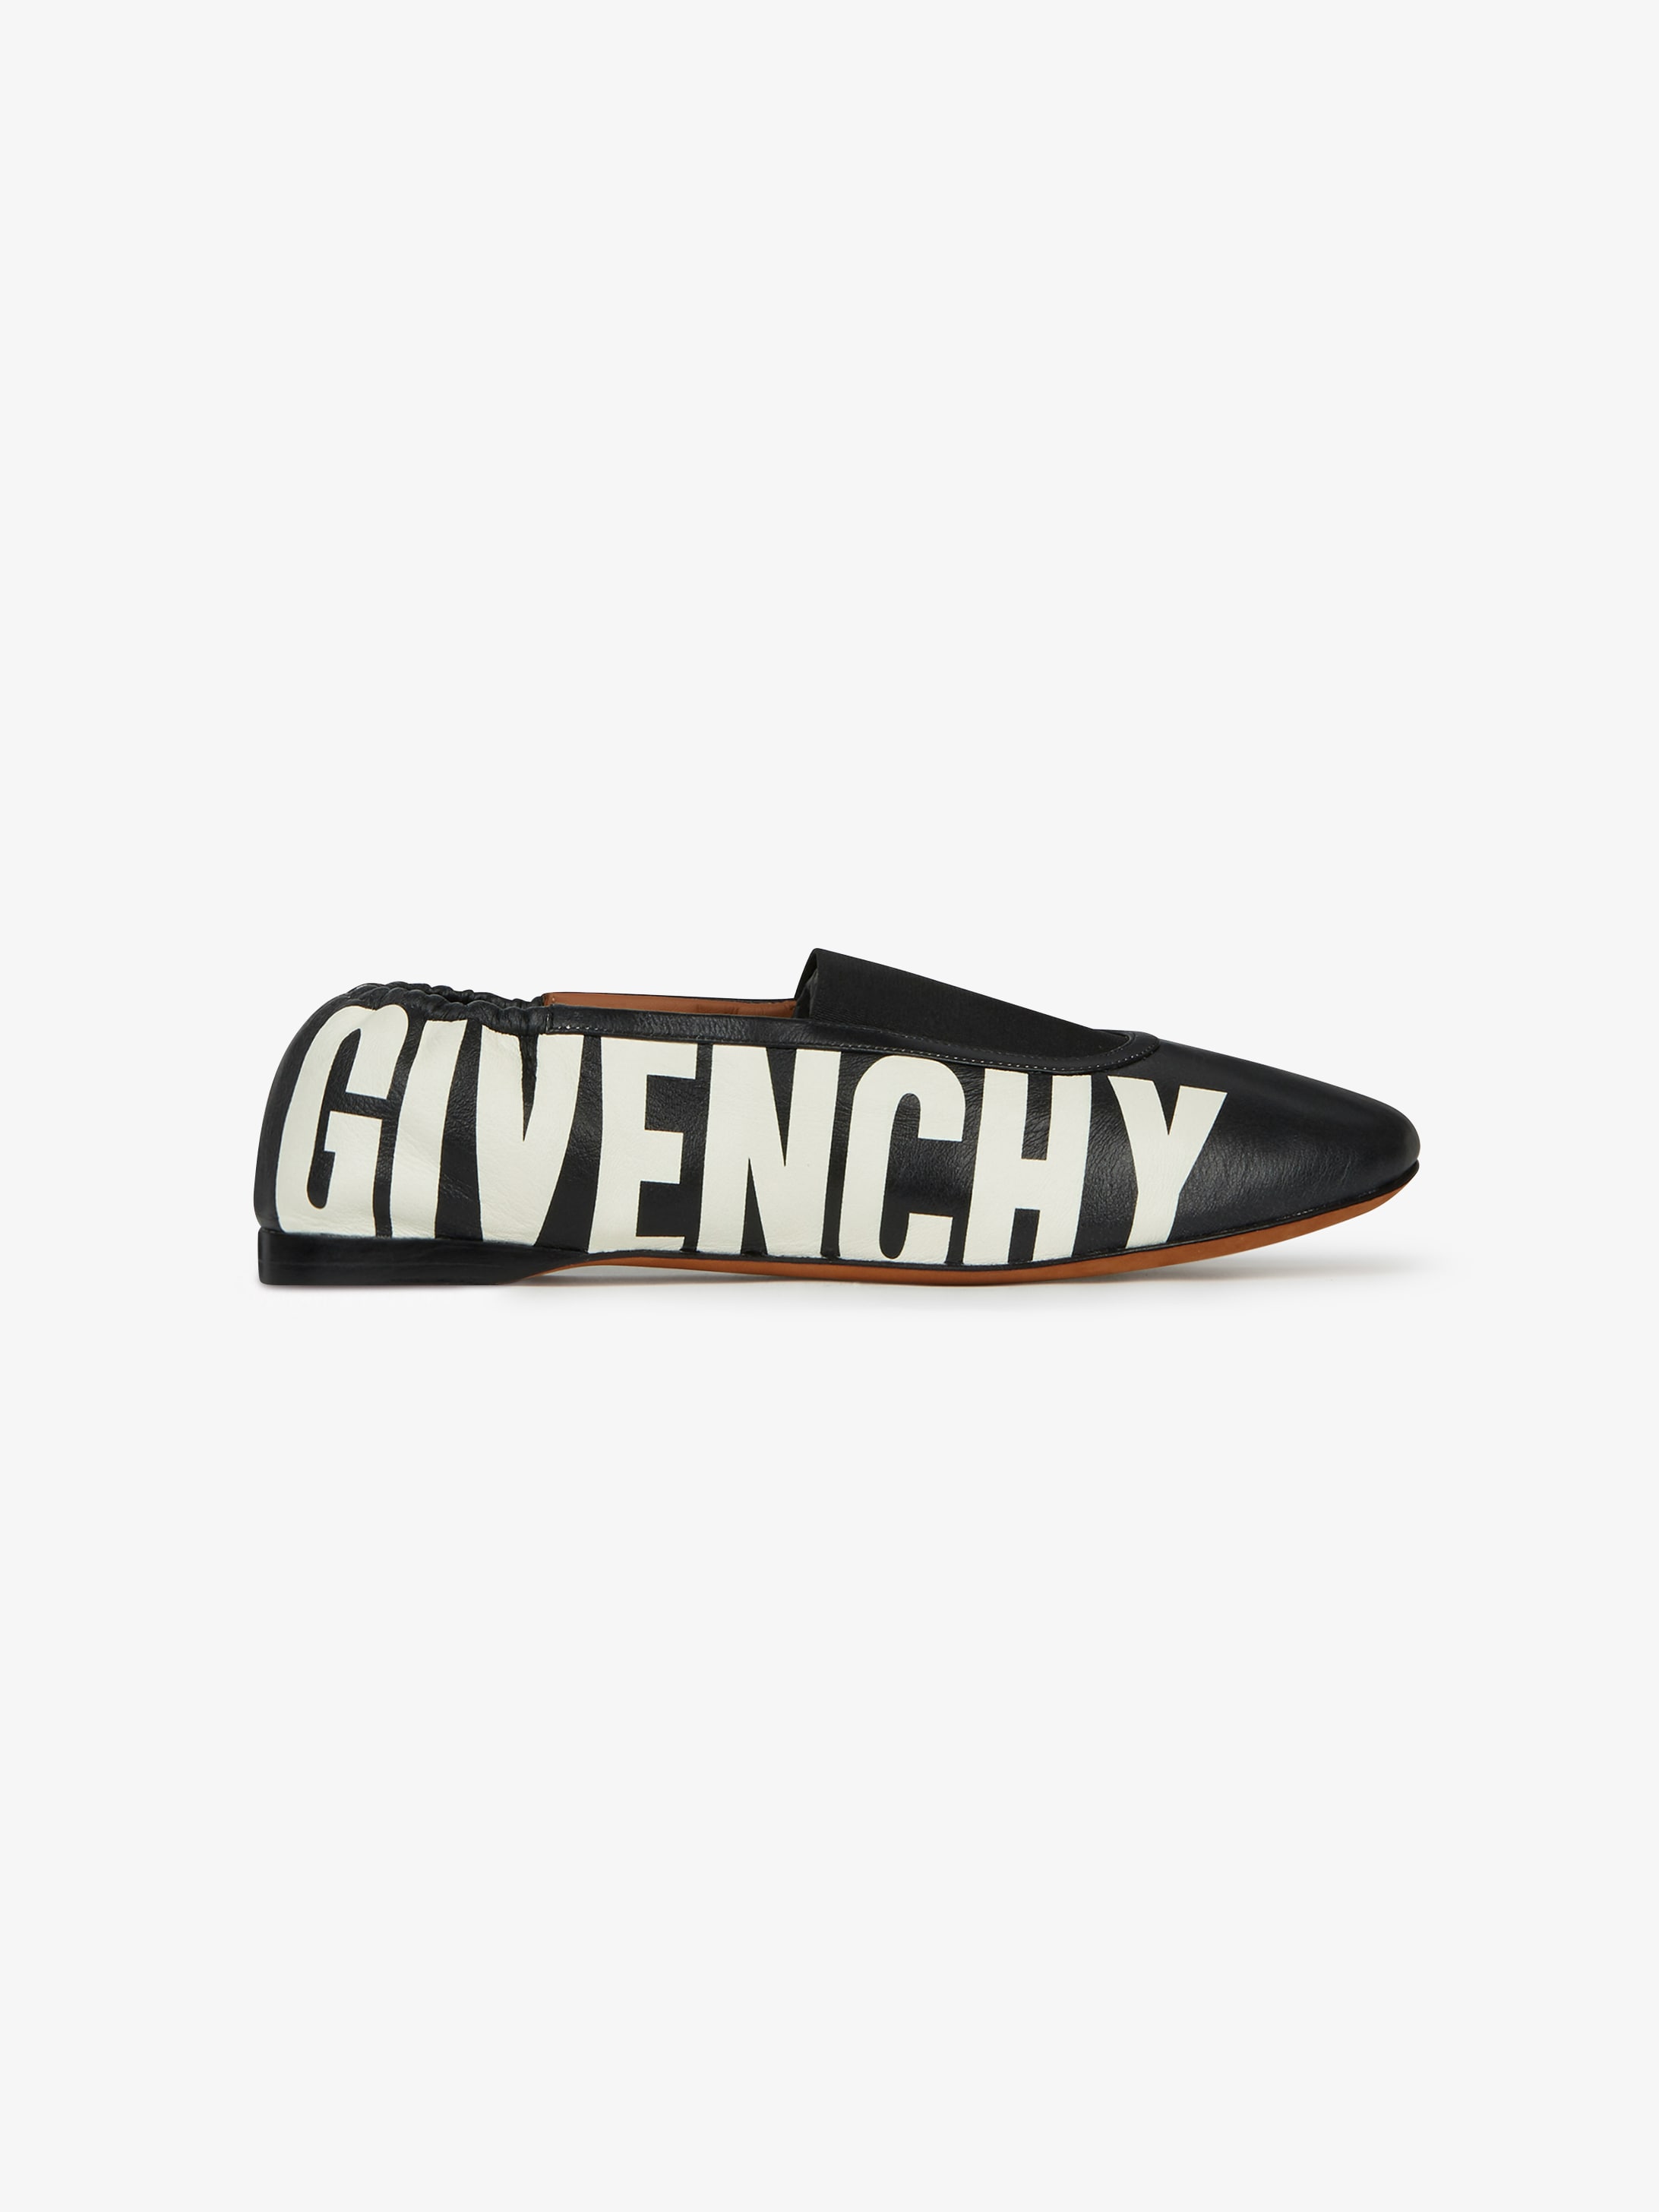 GIVENCHY printed leather Slippers 